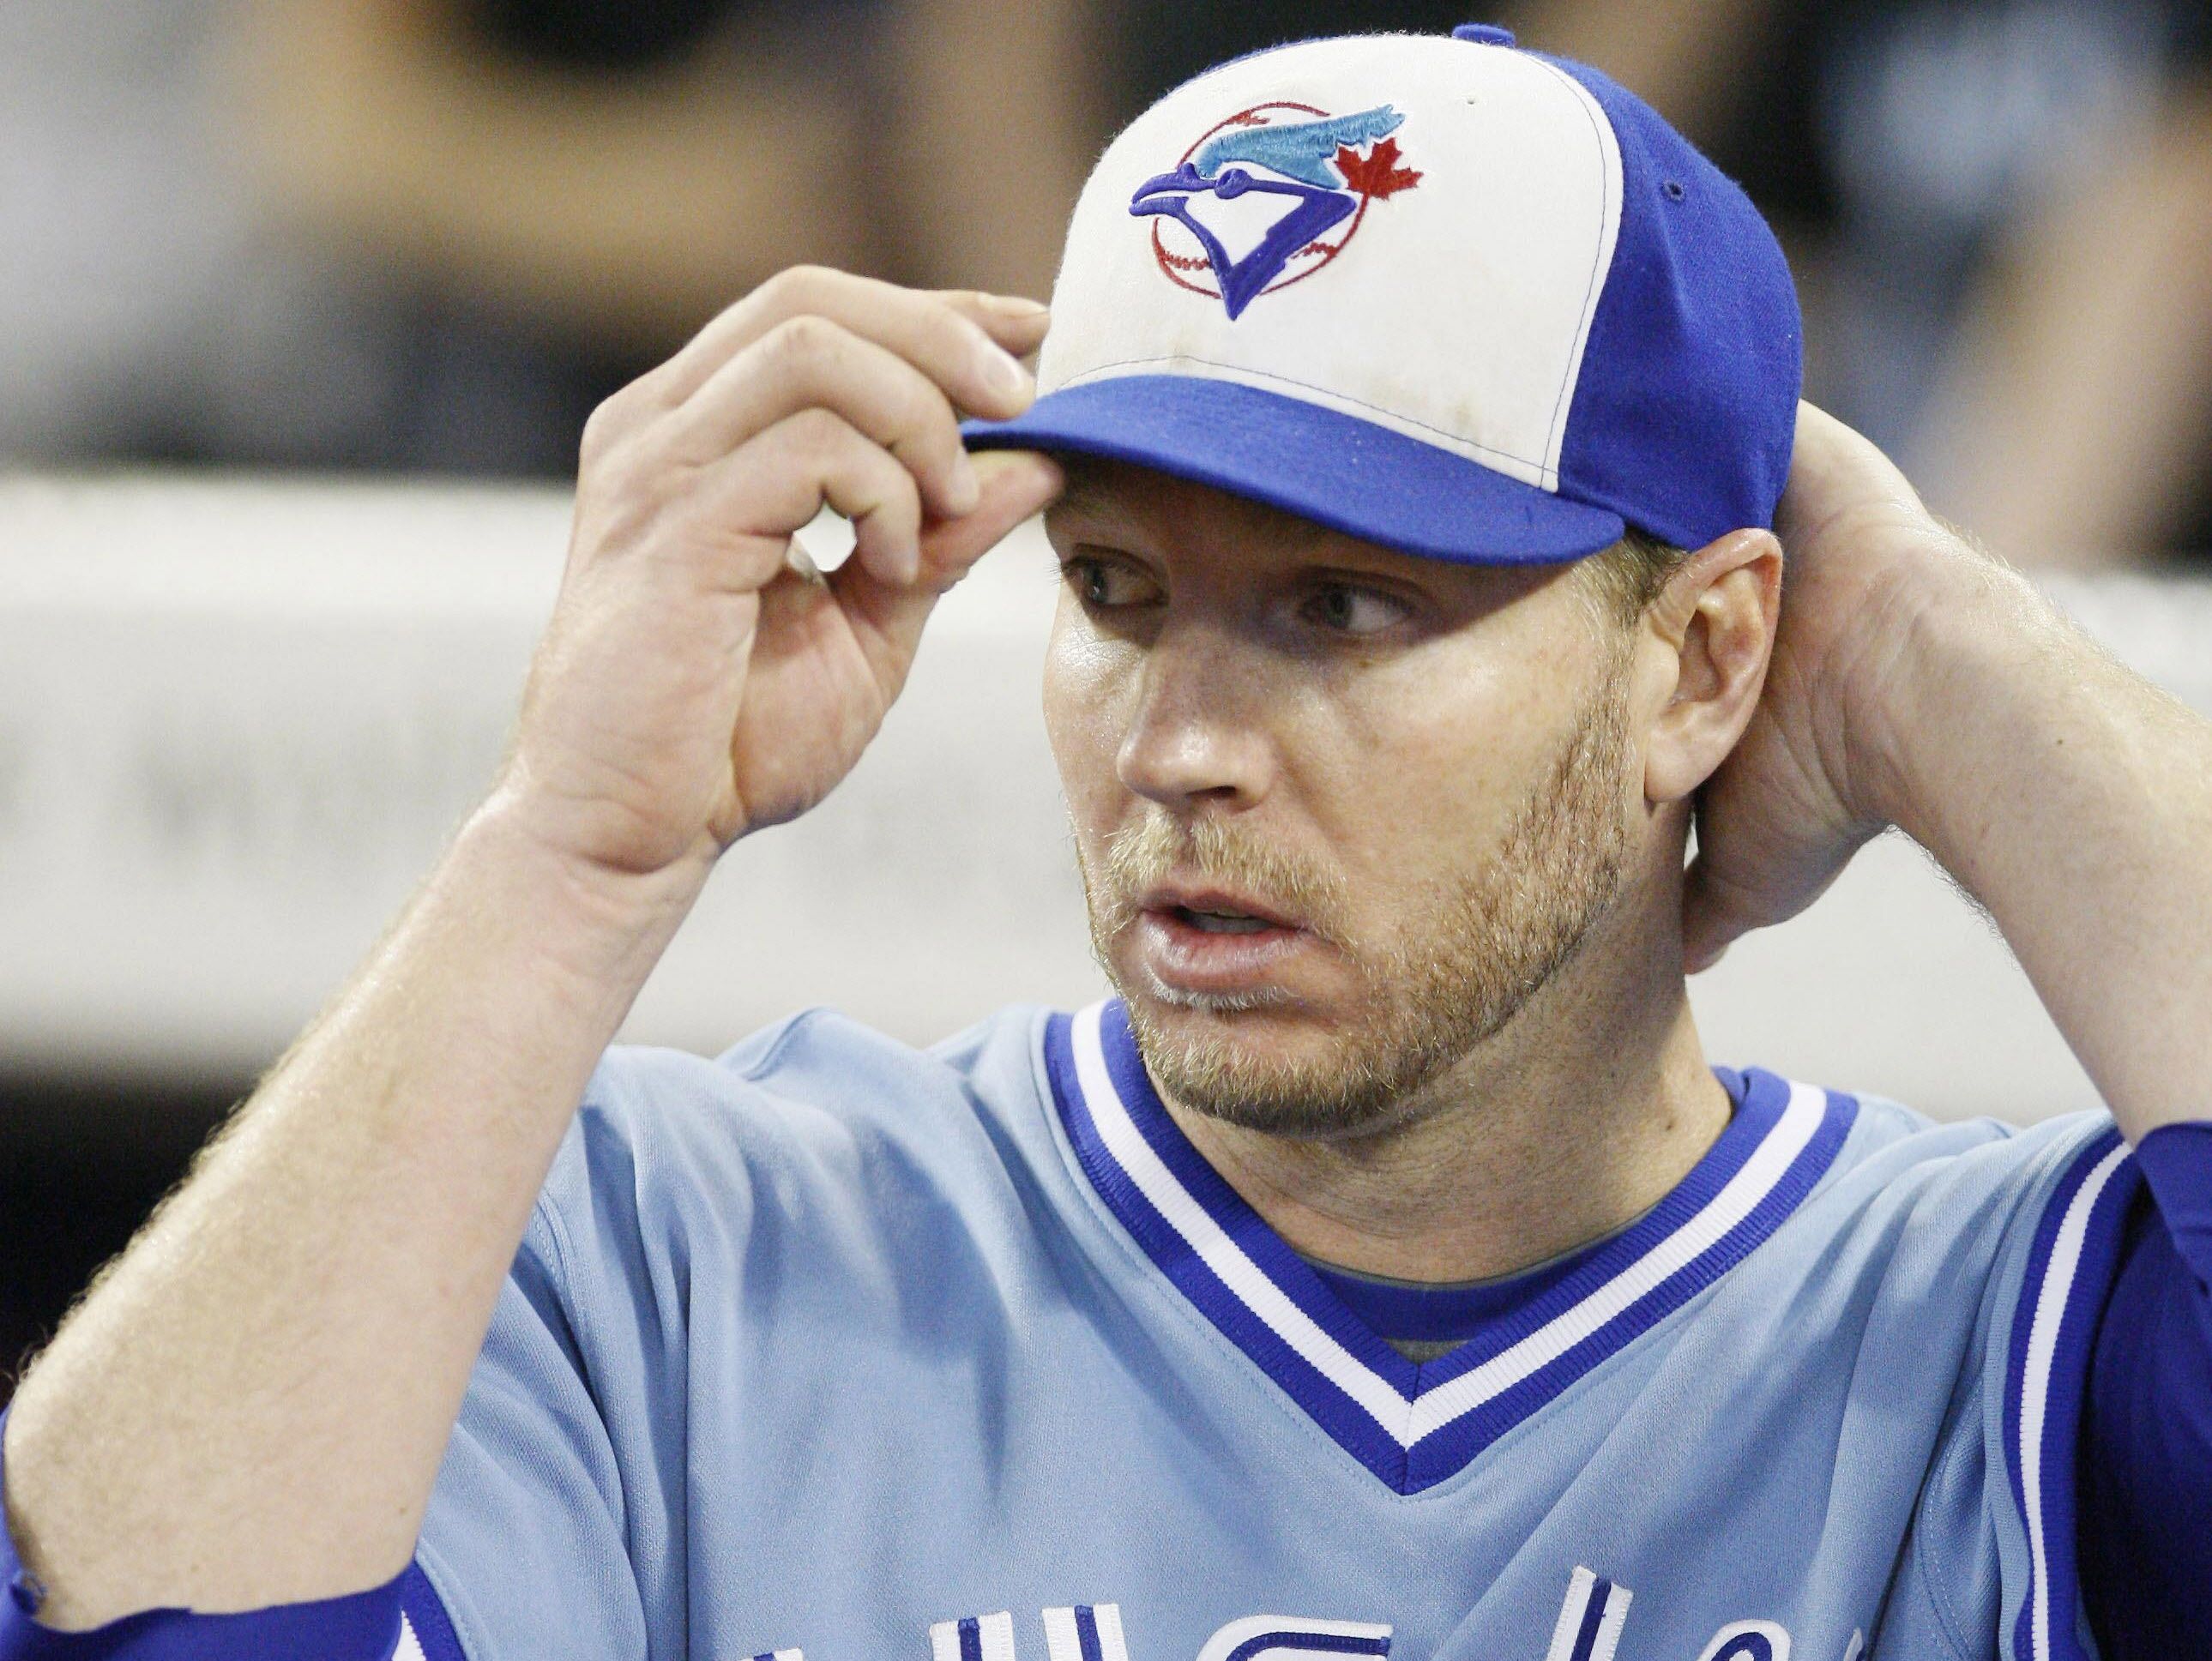 Hall of Famer Roy Halladay a one of a kind starting pitcher